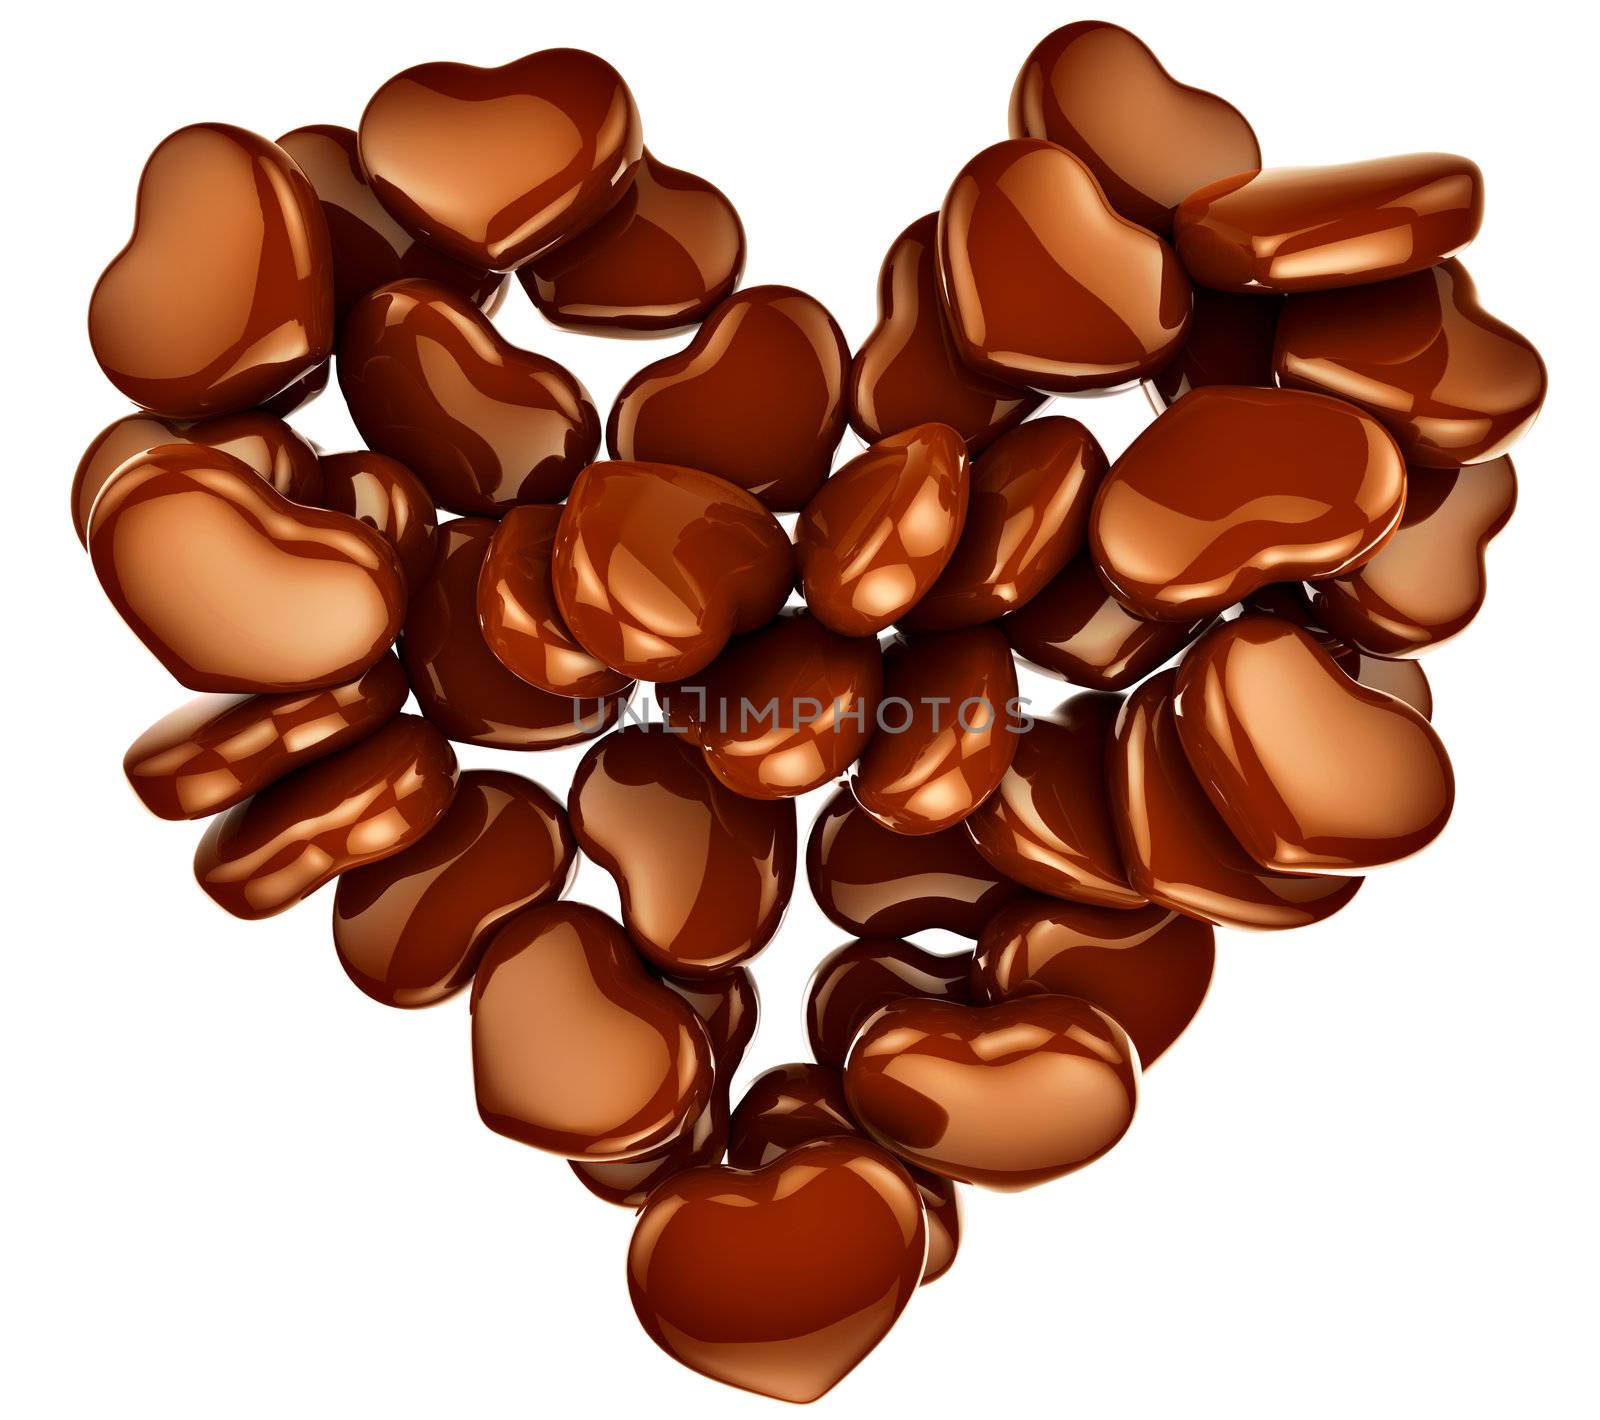 heart shape chocolate as gift for Valentine's Day by merzavka